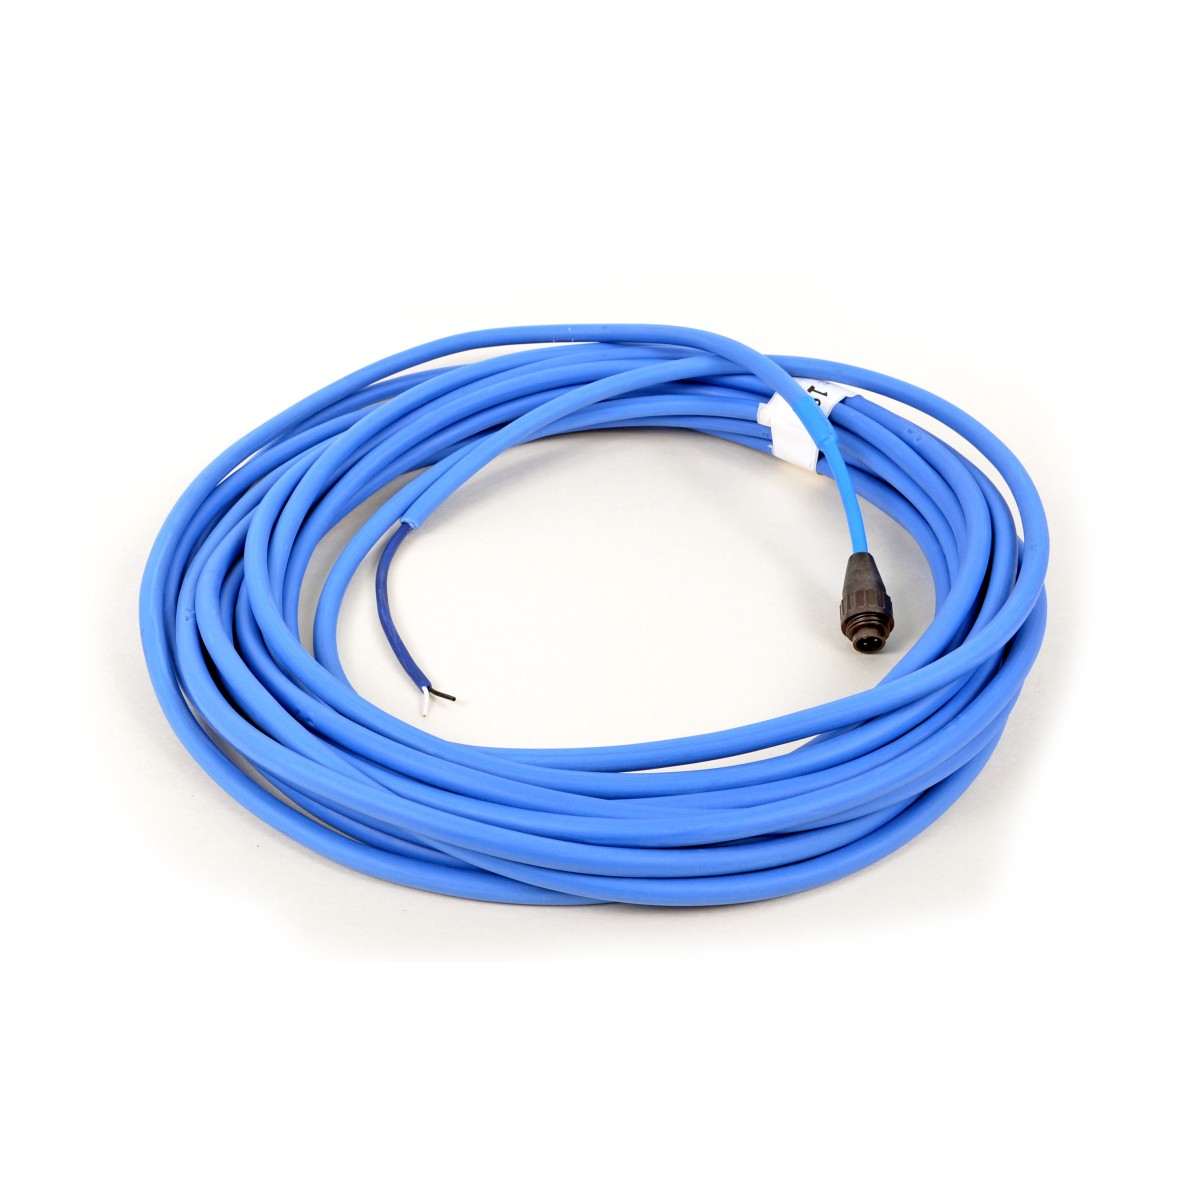 Floating cable with 18 m without junction for robotic pool